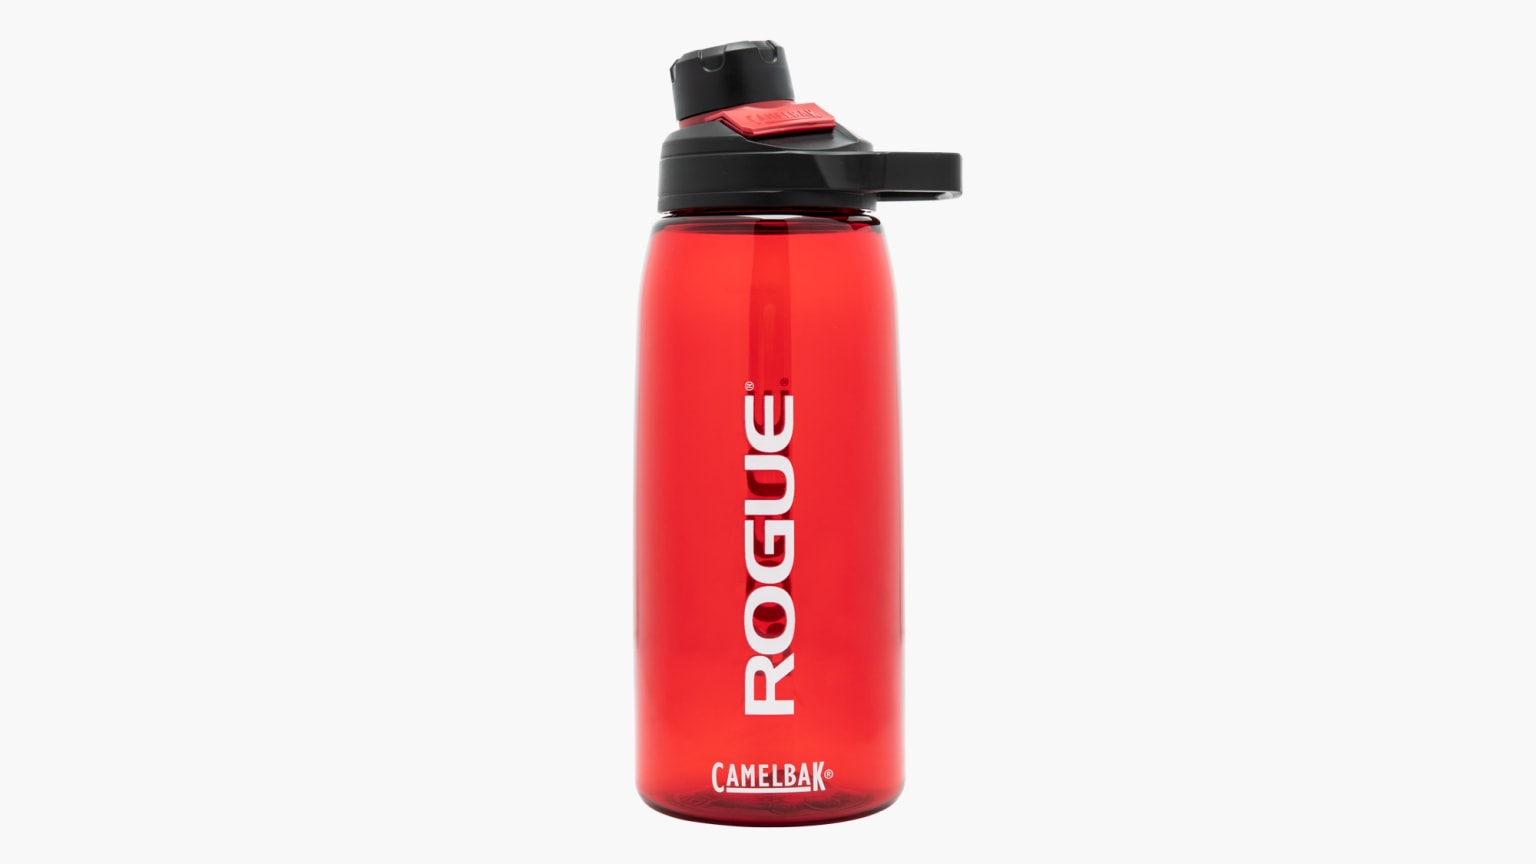 https://assets.roguefitness.com/f_auto,q_auto,c_limit,w_1536,b_rgb:f8f8f8/catalog/Gear%20and%20Accessories/Accessories/Shakers%20and%20Bottles/CB0019/CB0019-H_xteltg.png